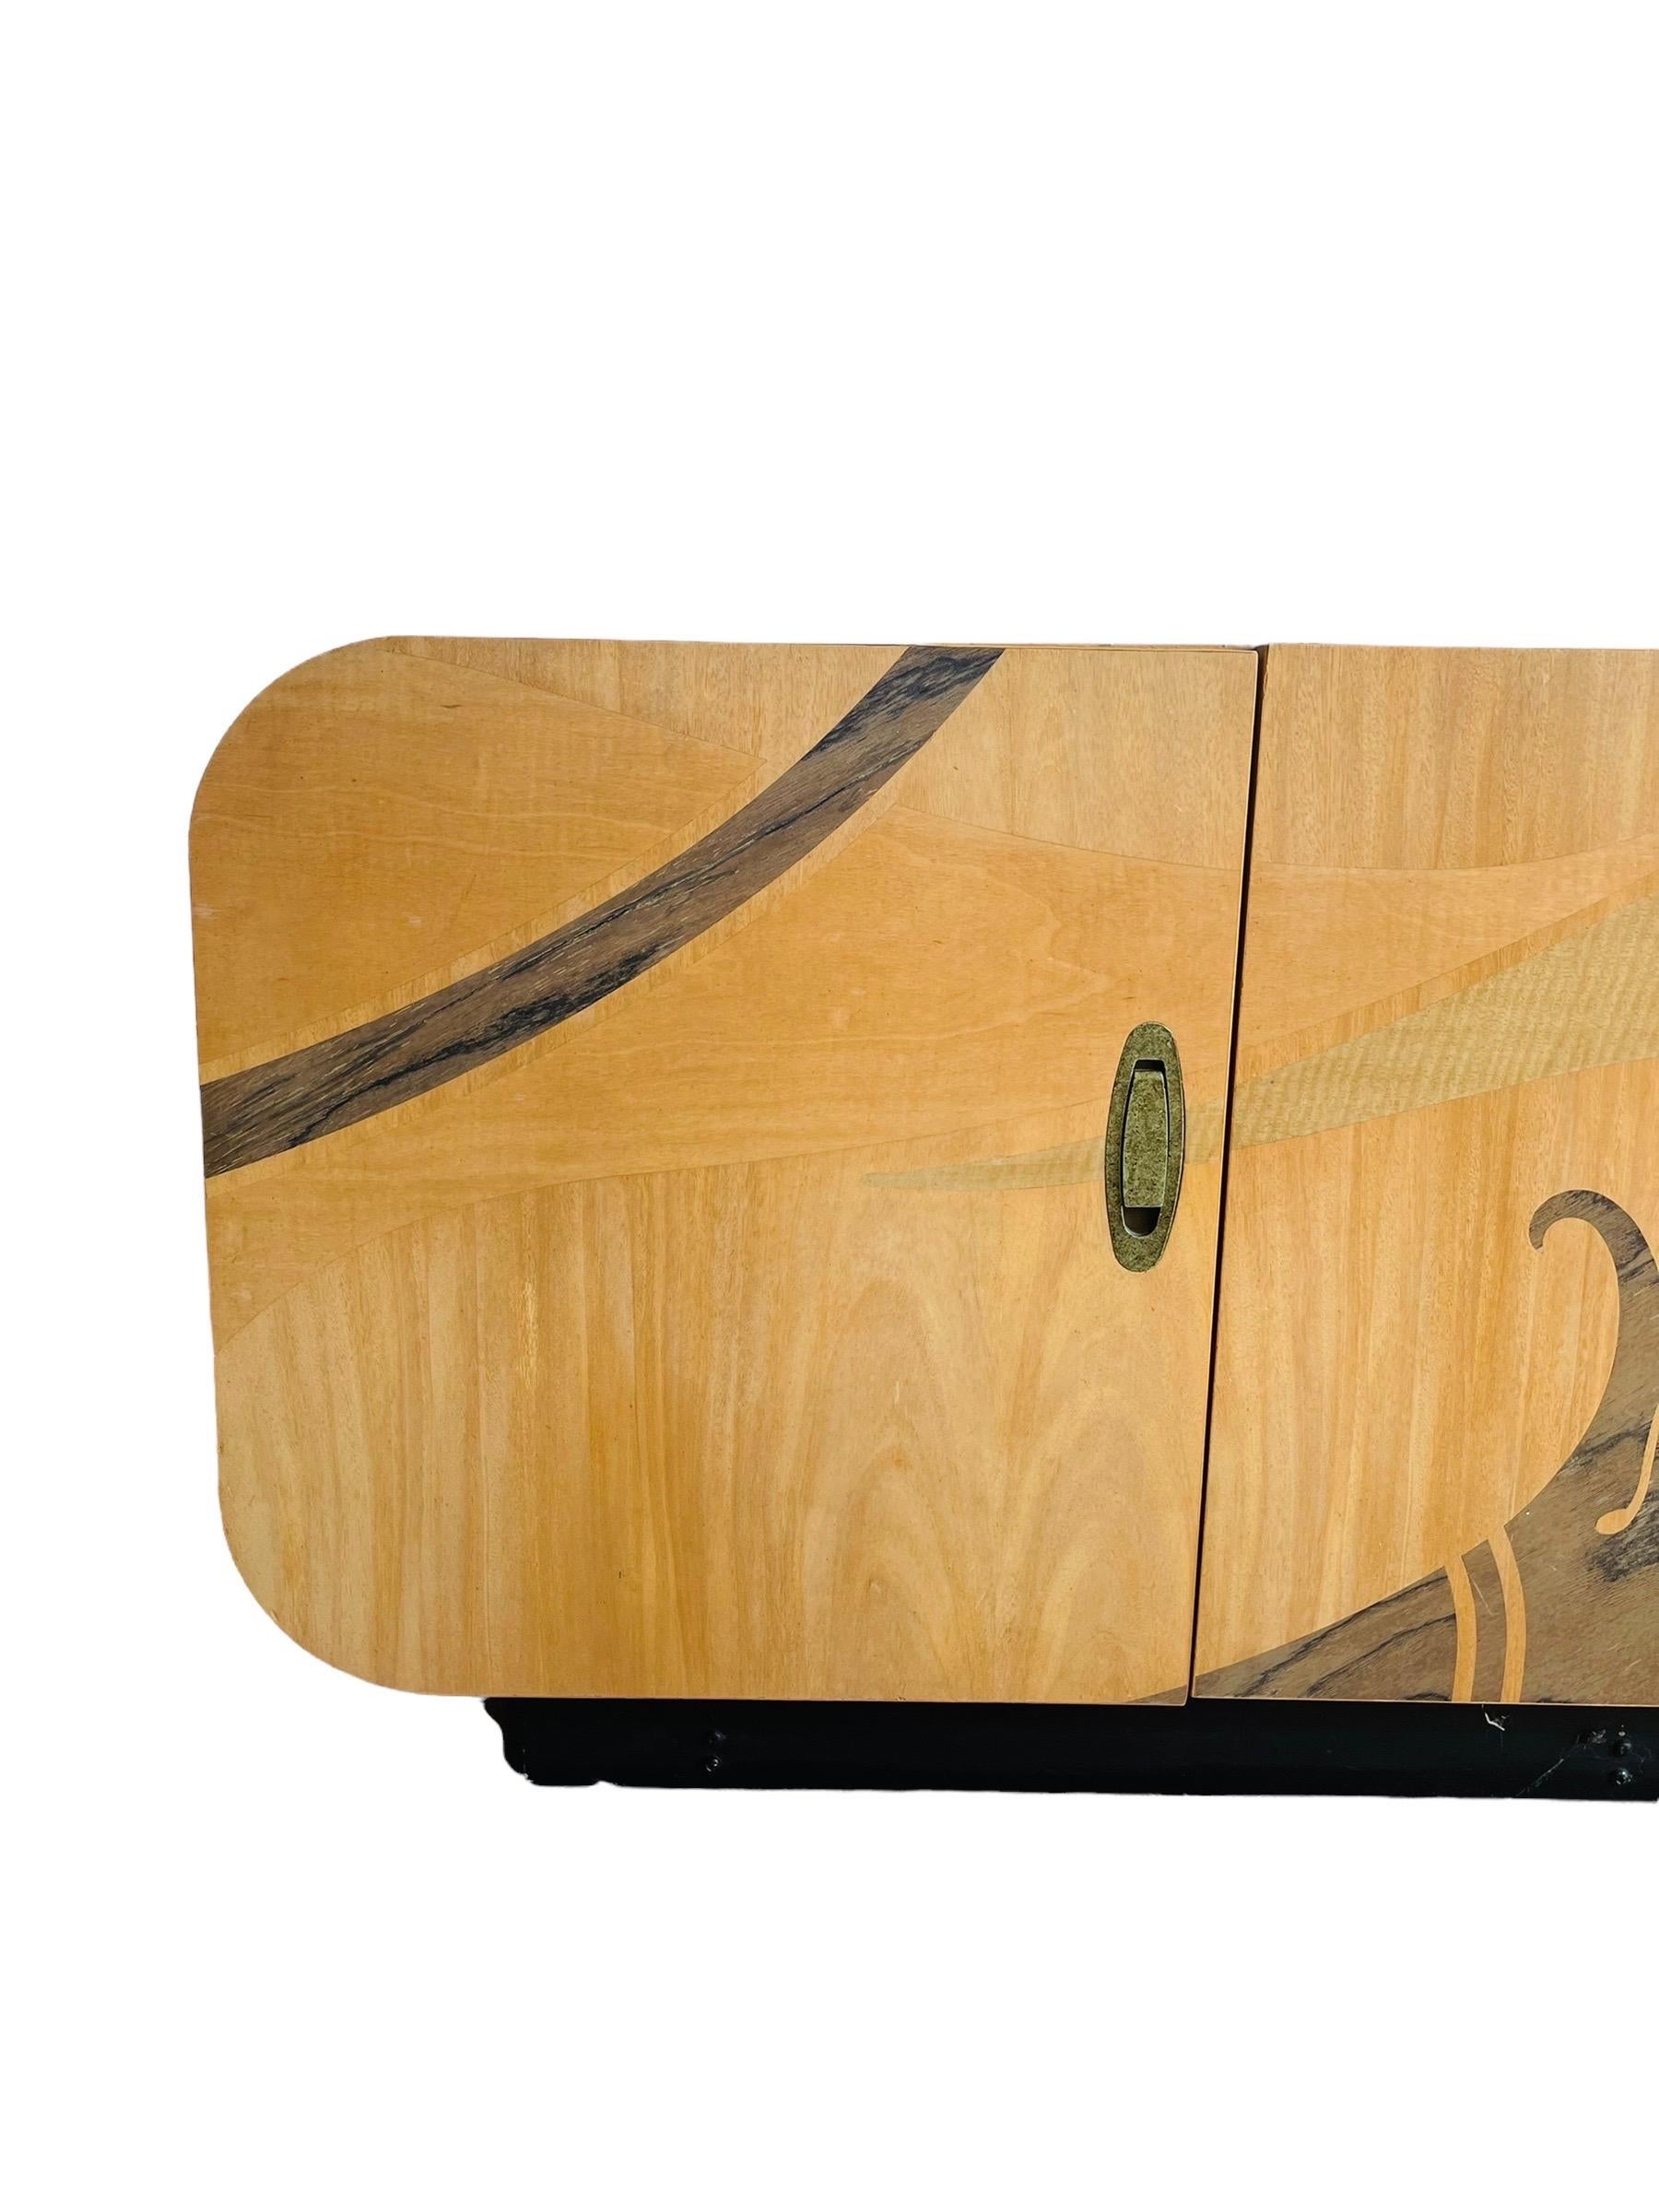 Unknown Modern Inlaid Beech Wood Credenza by White Furniture 